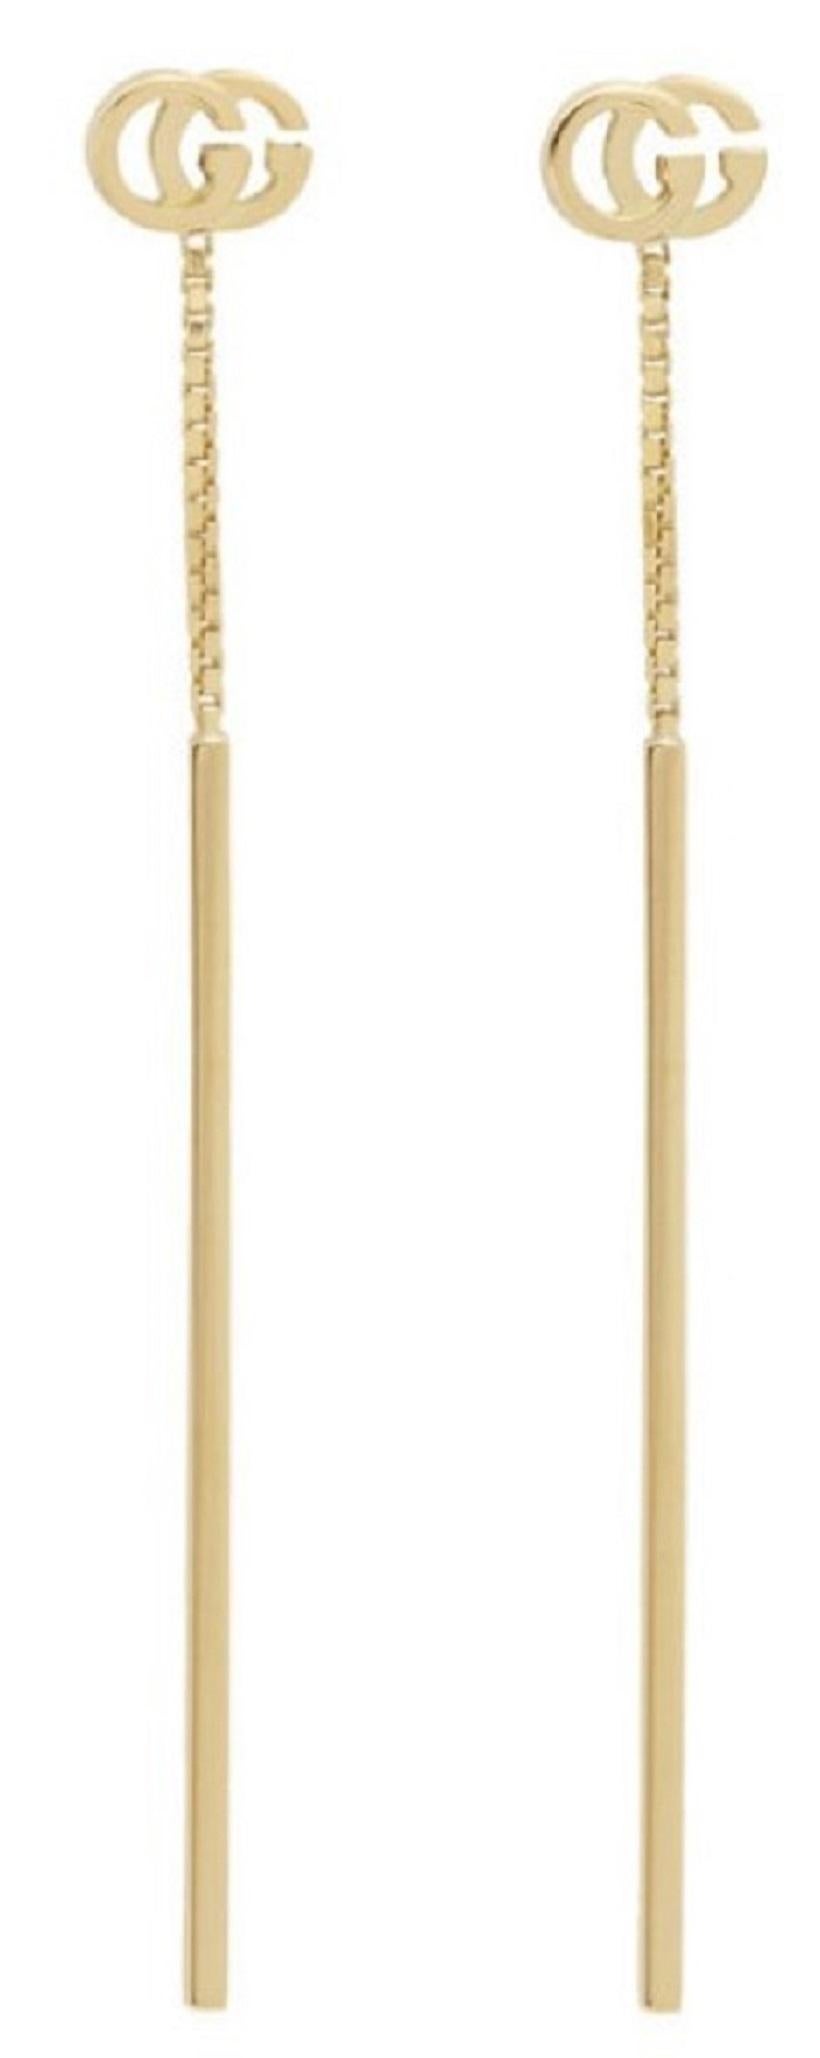 Double G Earrings Aged Gold Finish With Clear Crystals | GUCCI® US